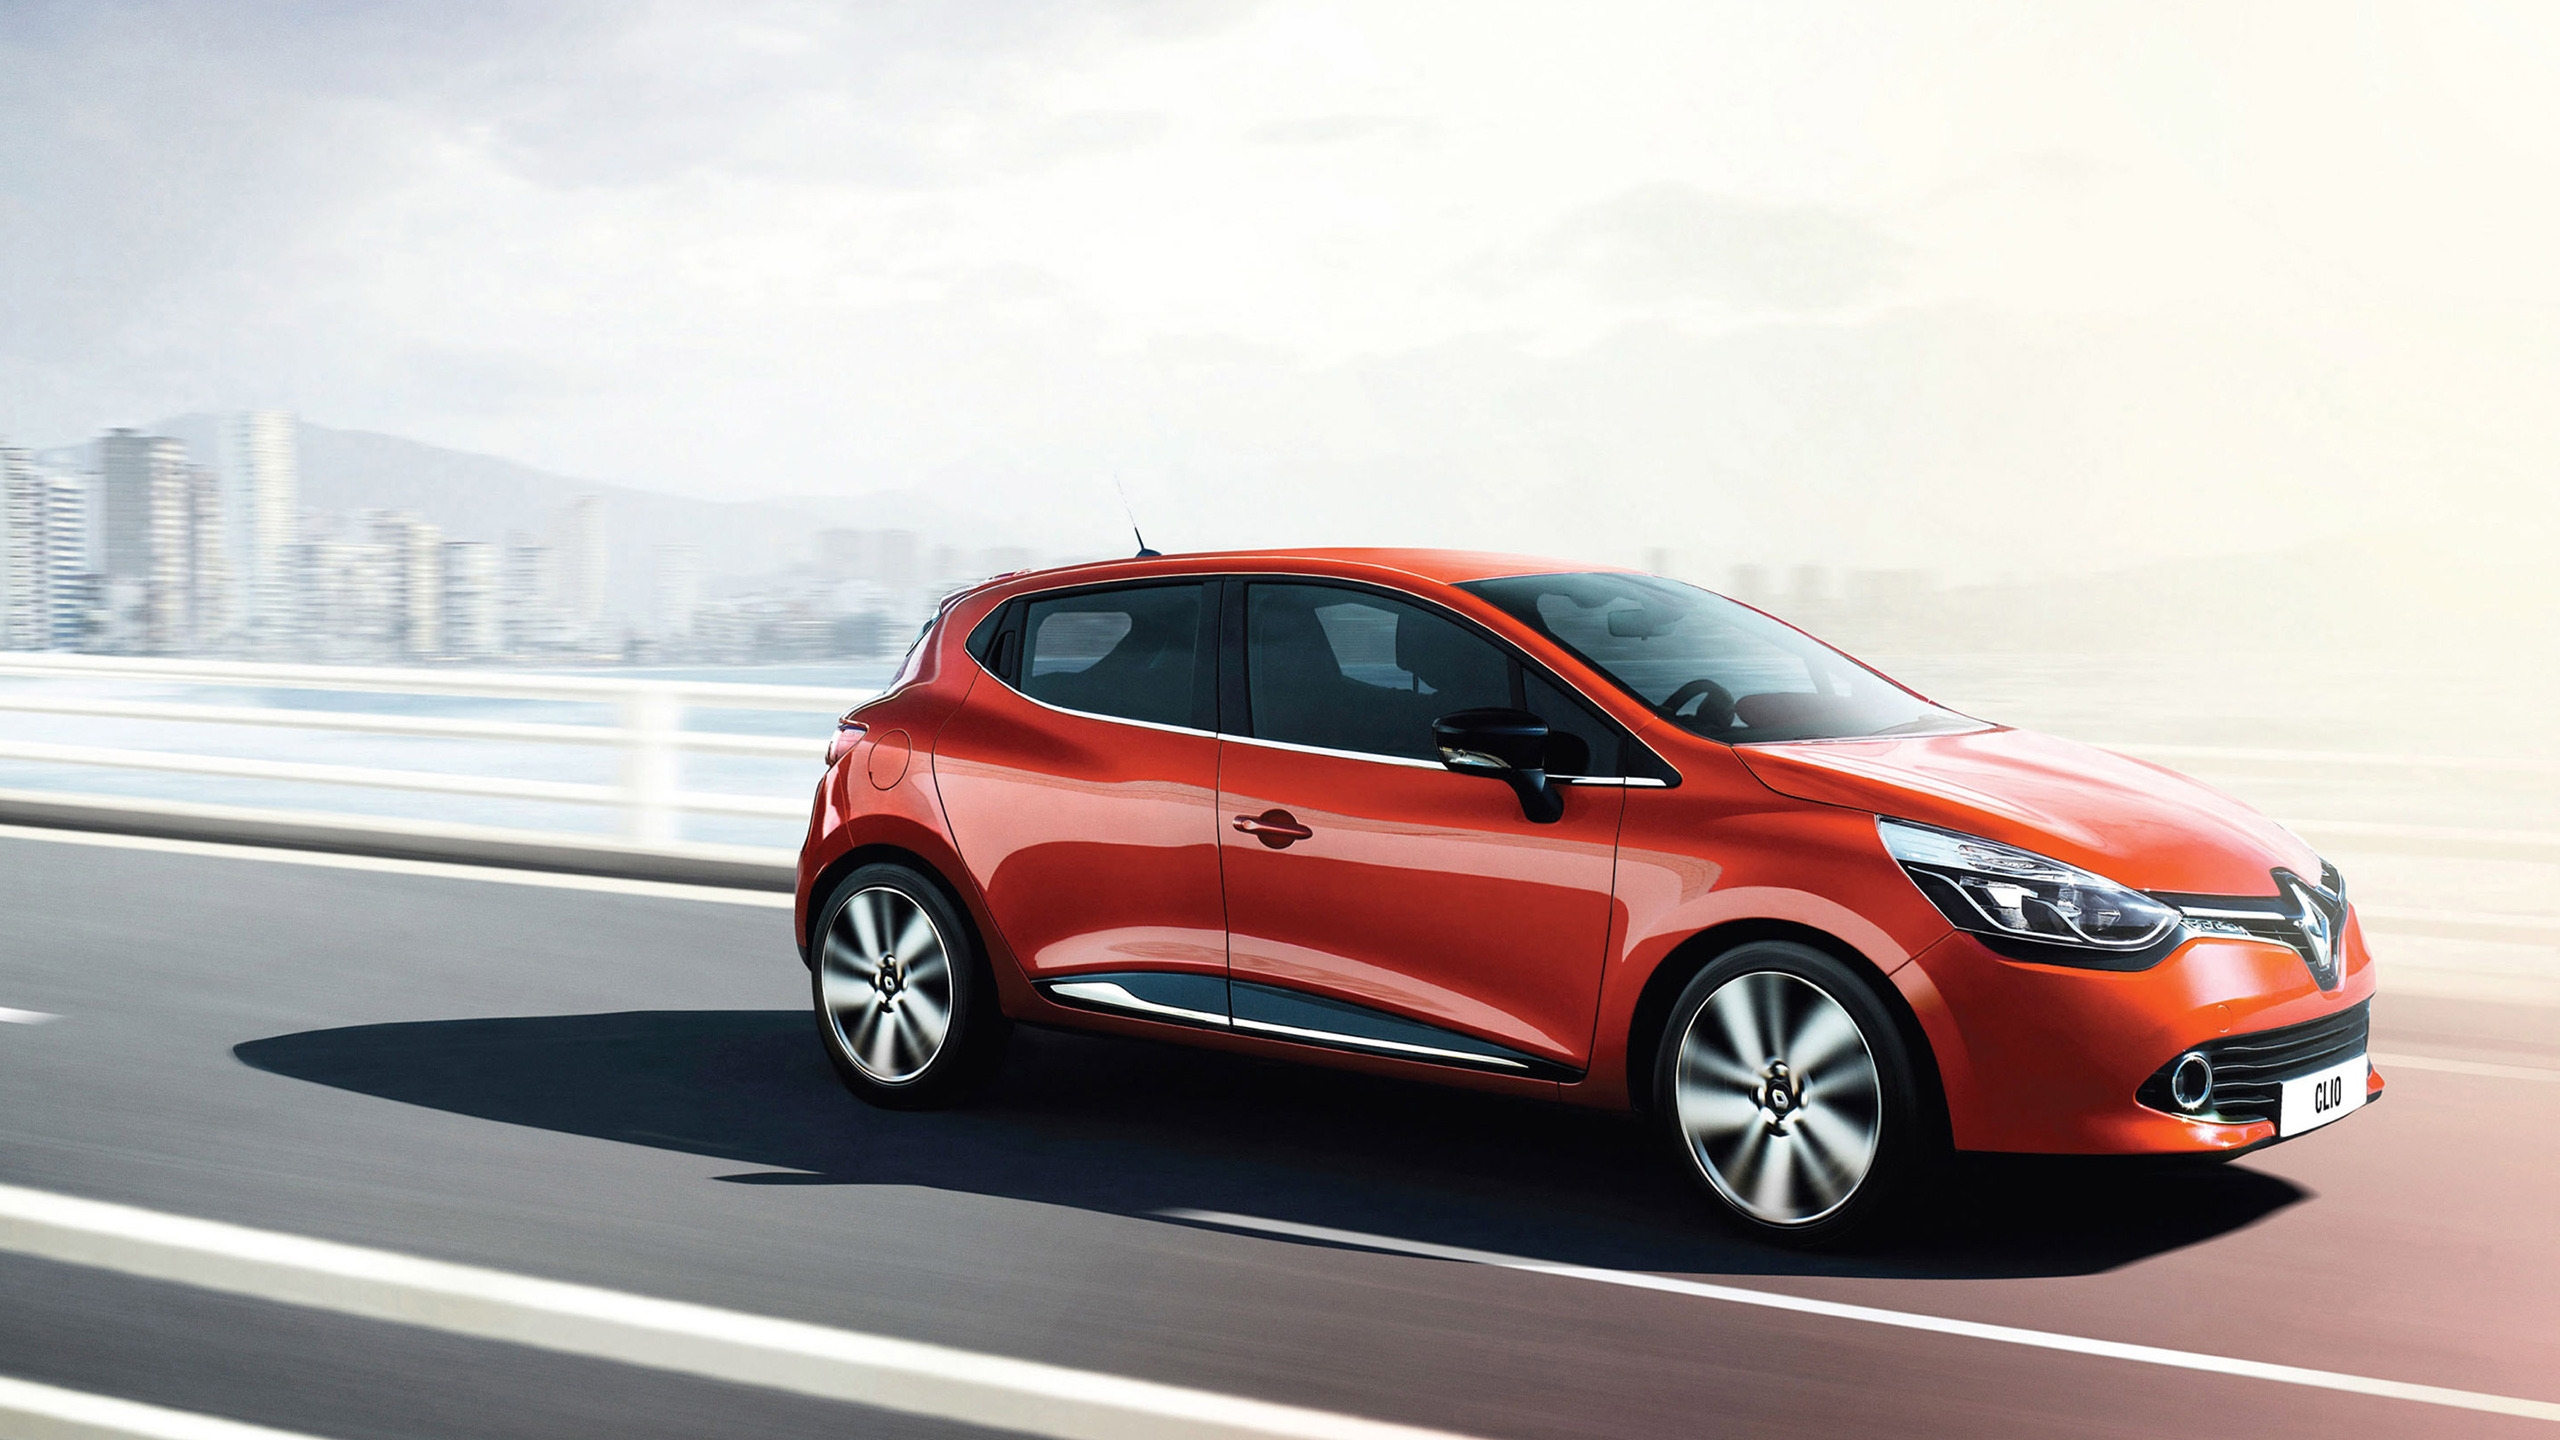 Cool Renault Clio 2013 for 2560x1440 HDTV resolution